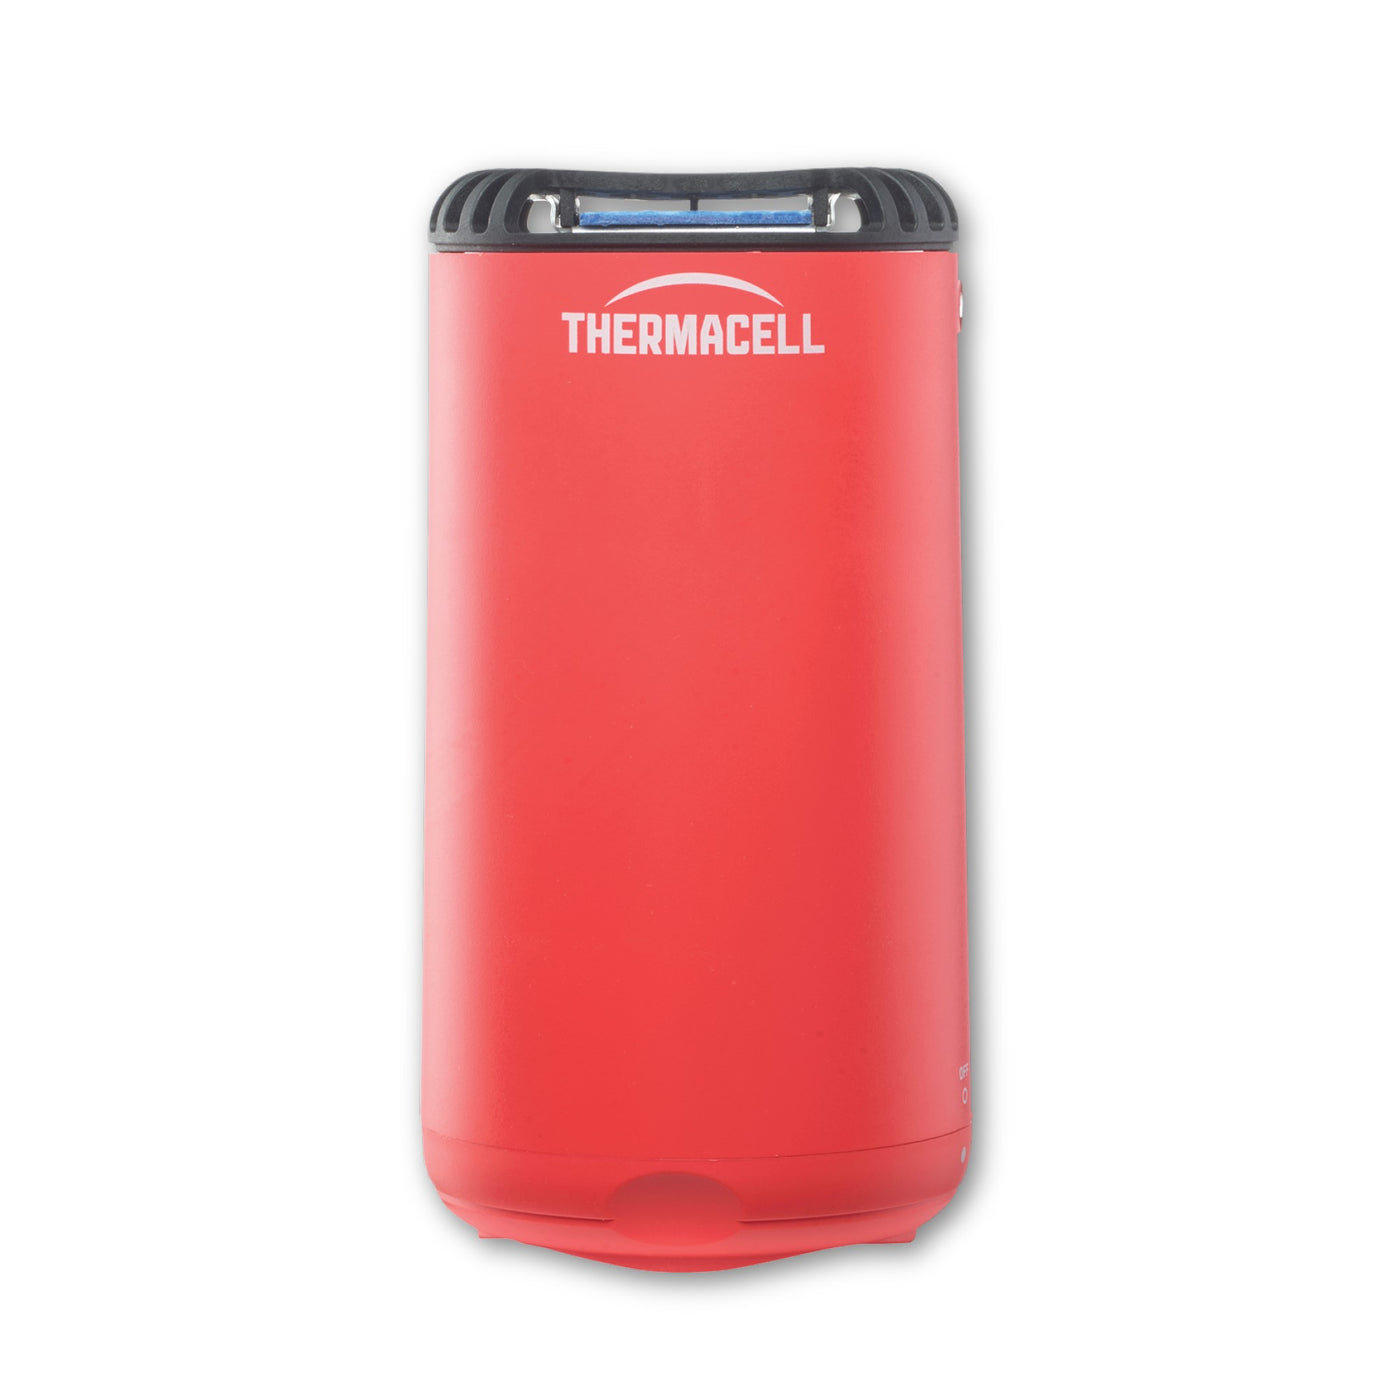 THERMACELL "Patio Shield" Mosquito Repellent